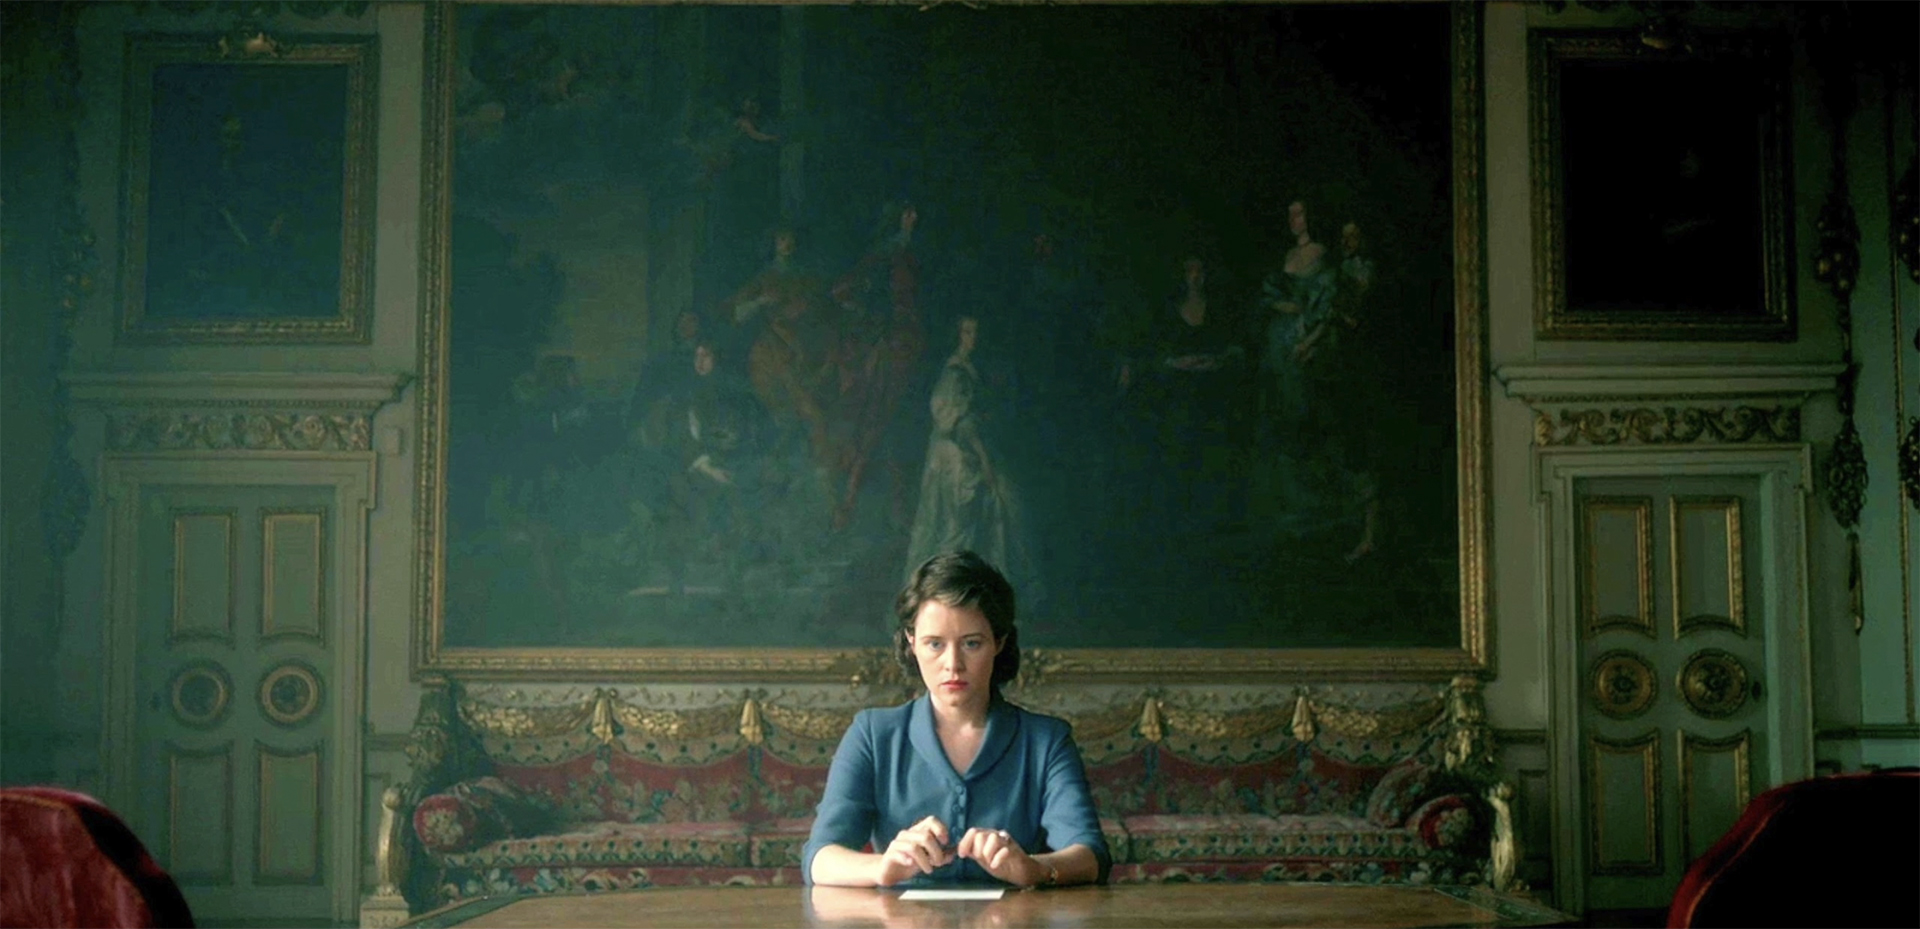 How to guide the viewer's attention with color - good example of high contrast from "The Crown"